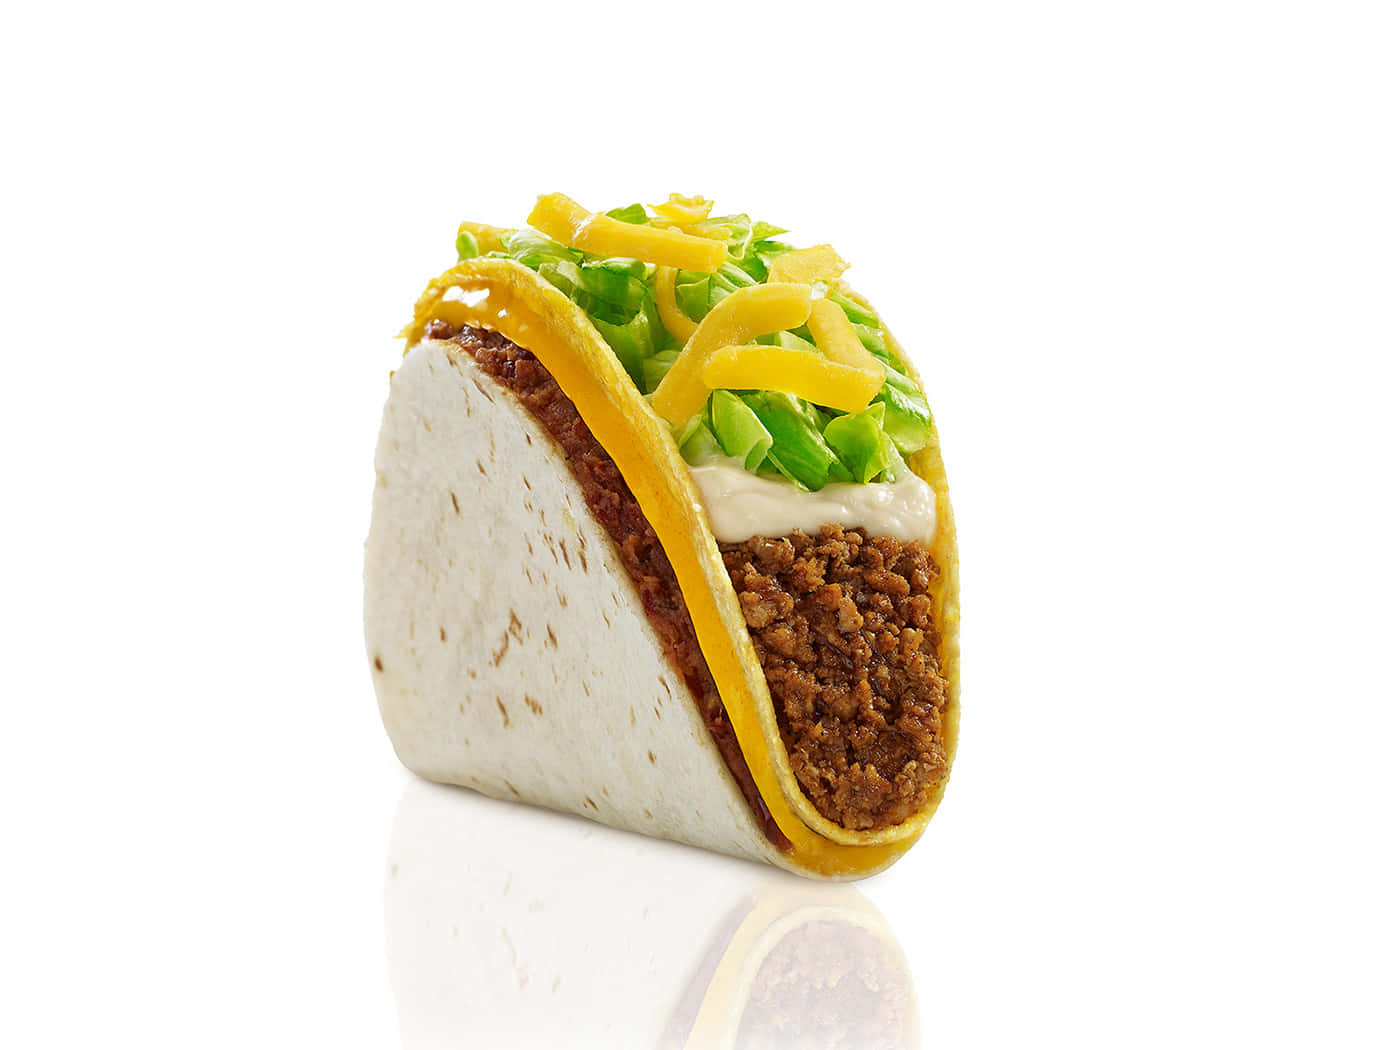 Get your Taco Bell Fix with a delicious Beefy Classic Taco